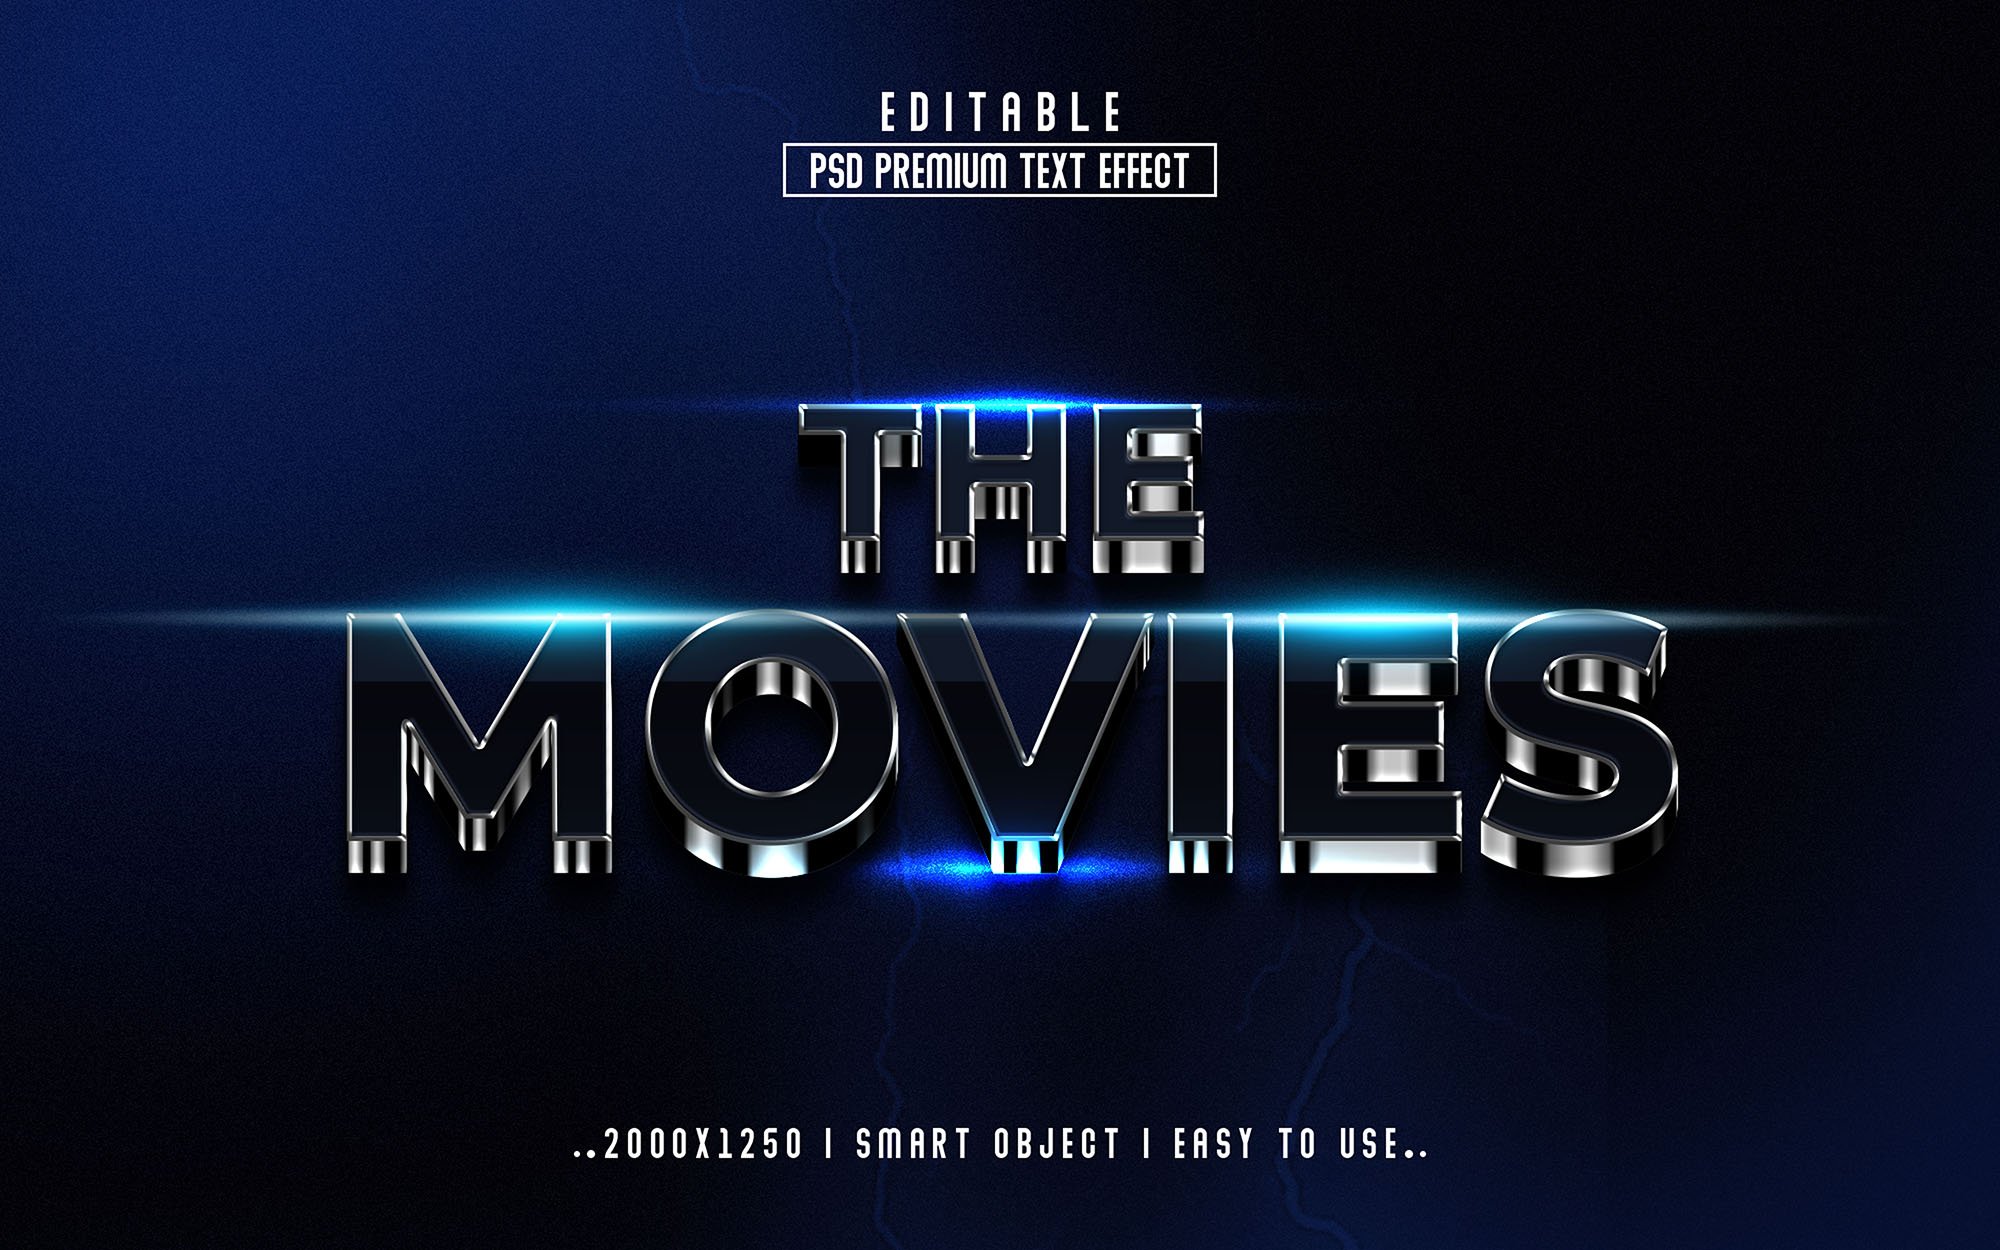 The Movies 3D Editable Text Effectcover image.